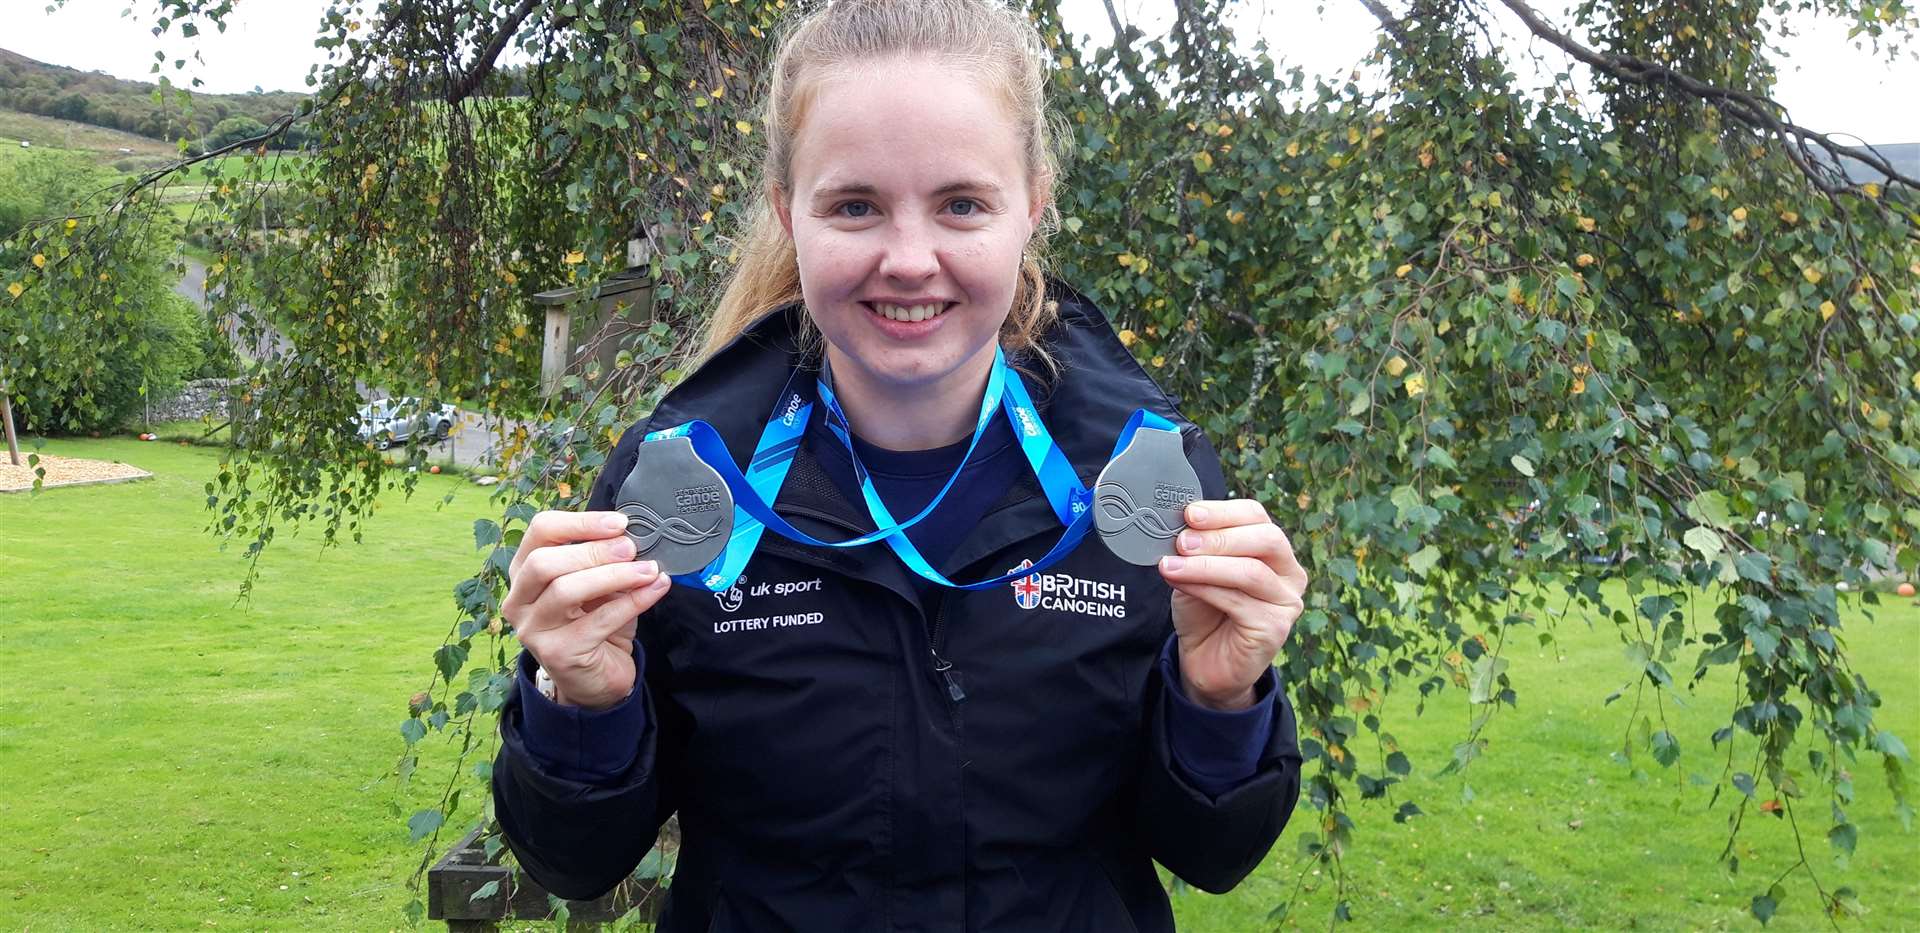 Hope Gordon with the silver medals she won at the World Canoe Championships Denmark in 2021.